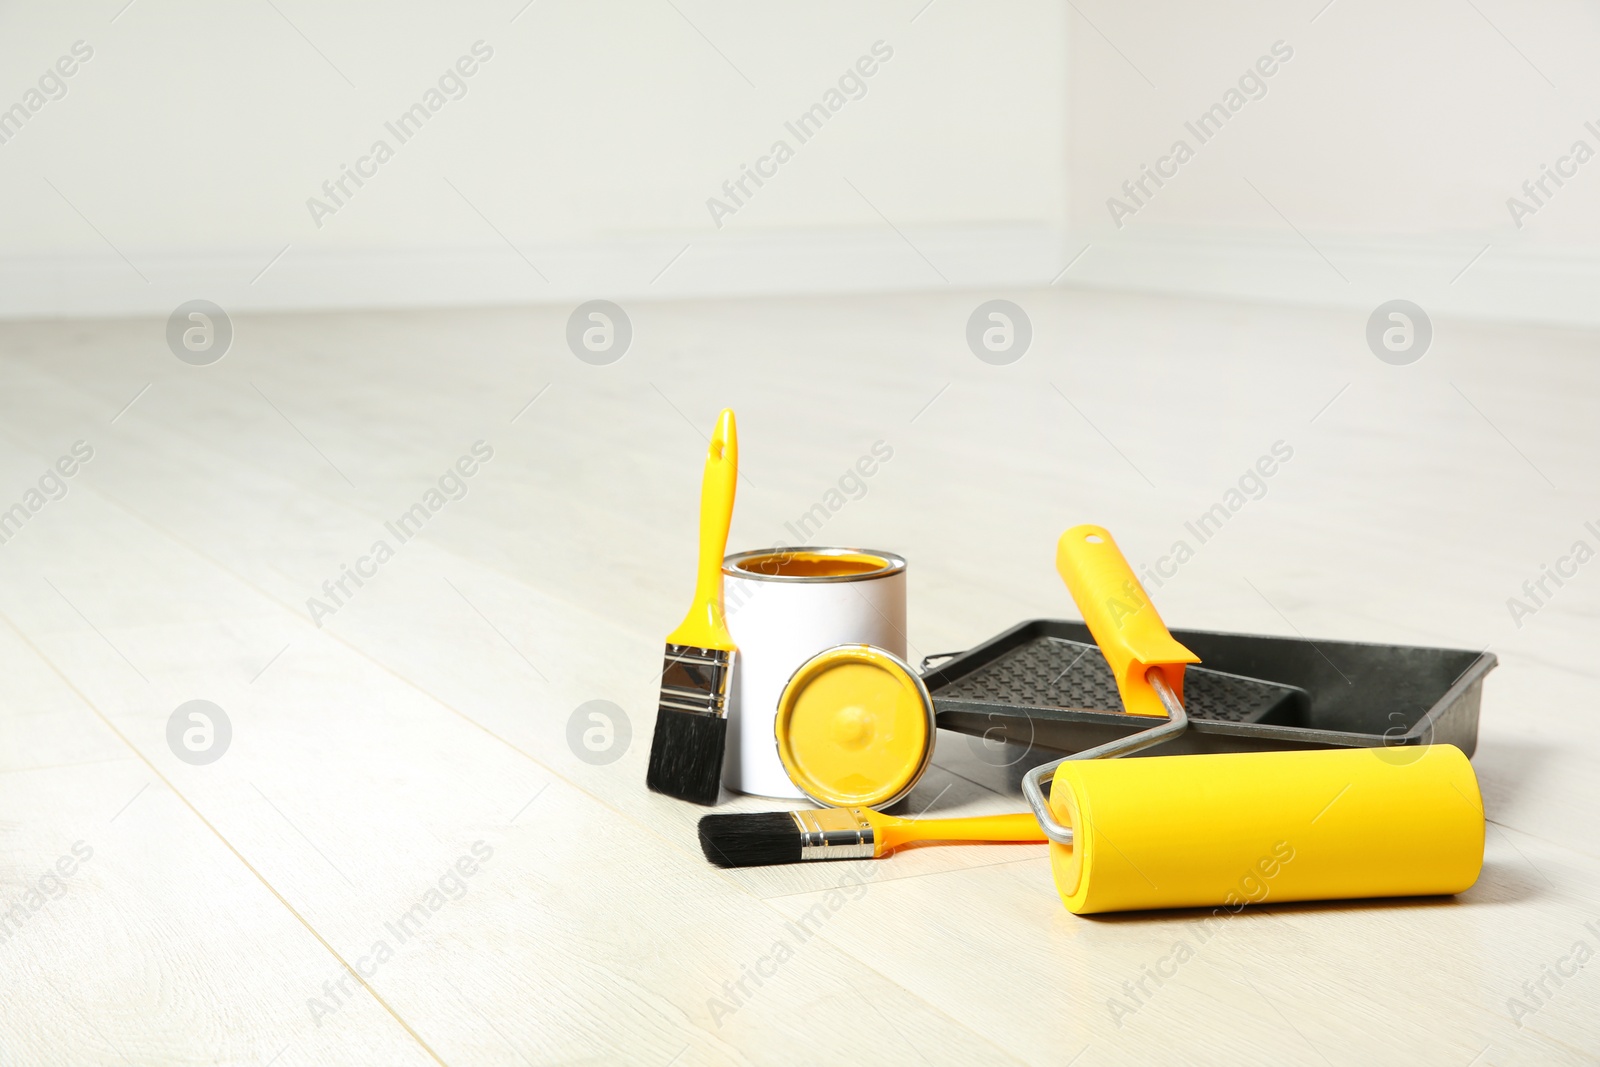 Photo of Can of paint and decorator tools on wooden floor indoors. Space for text